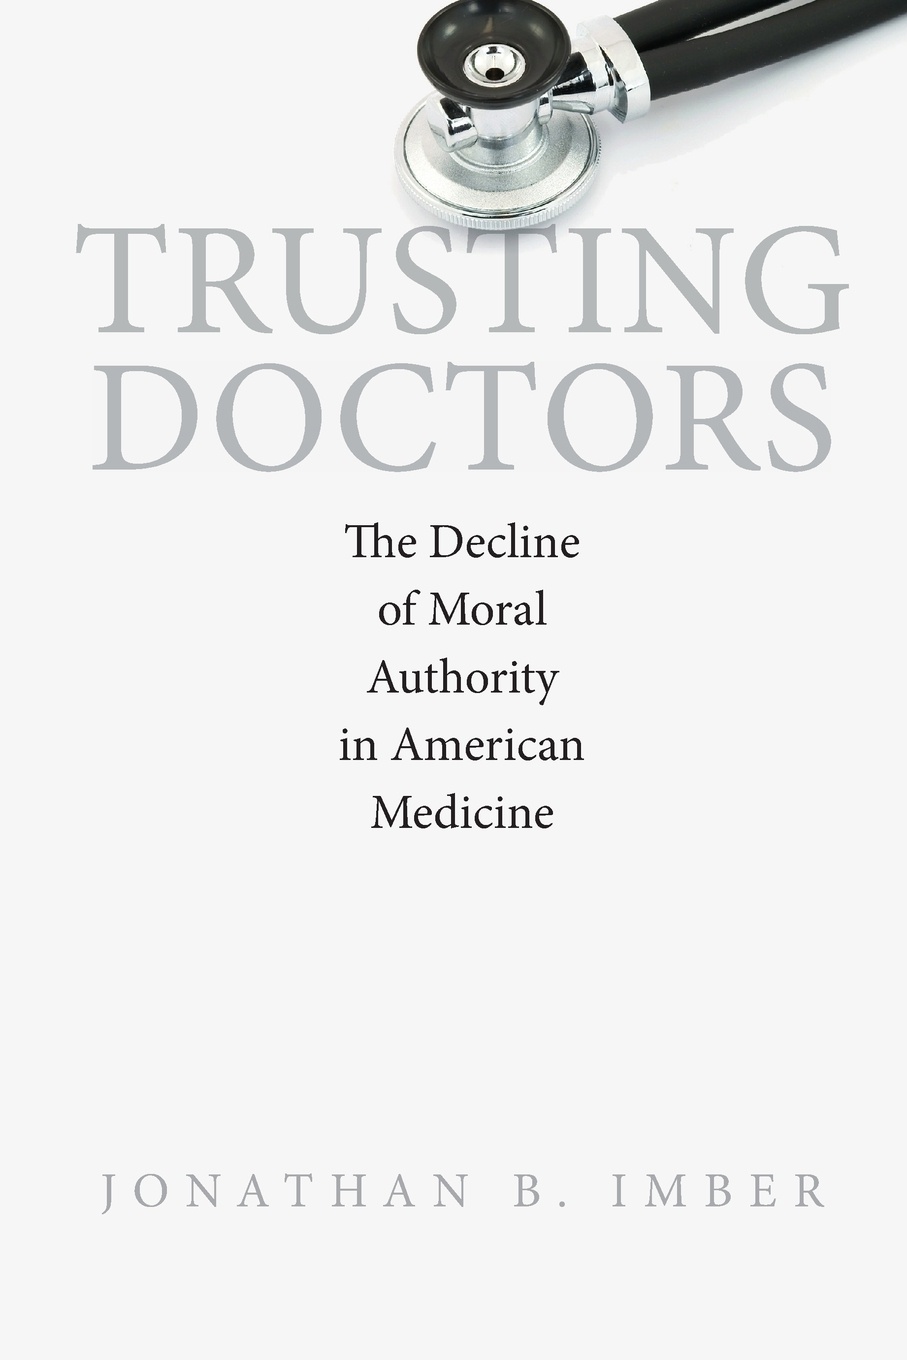 Trusting Doctors. The Decline of Moral Authority in American Medicine